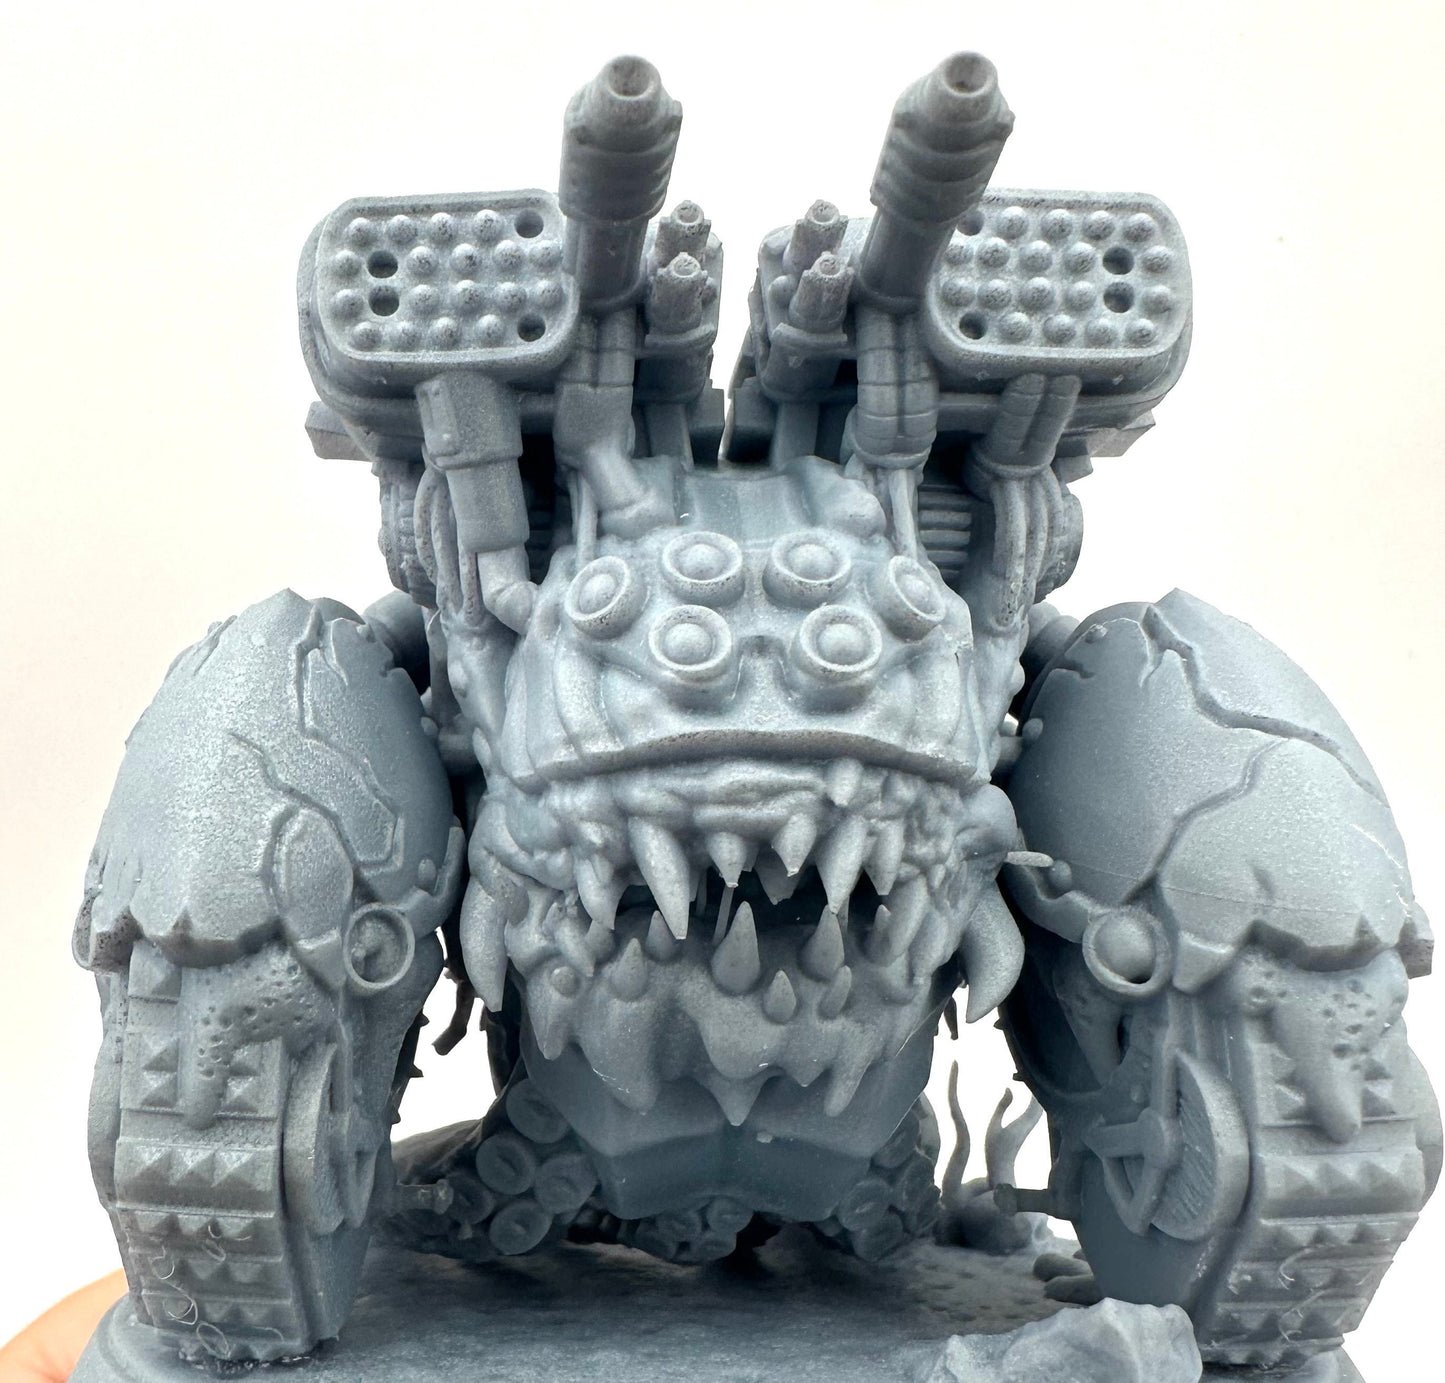 3d Printed Abyssal Spankler by Immaterium God Miniatures